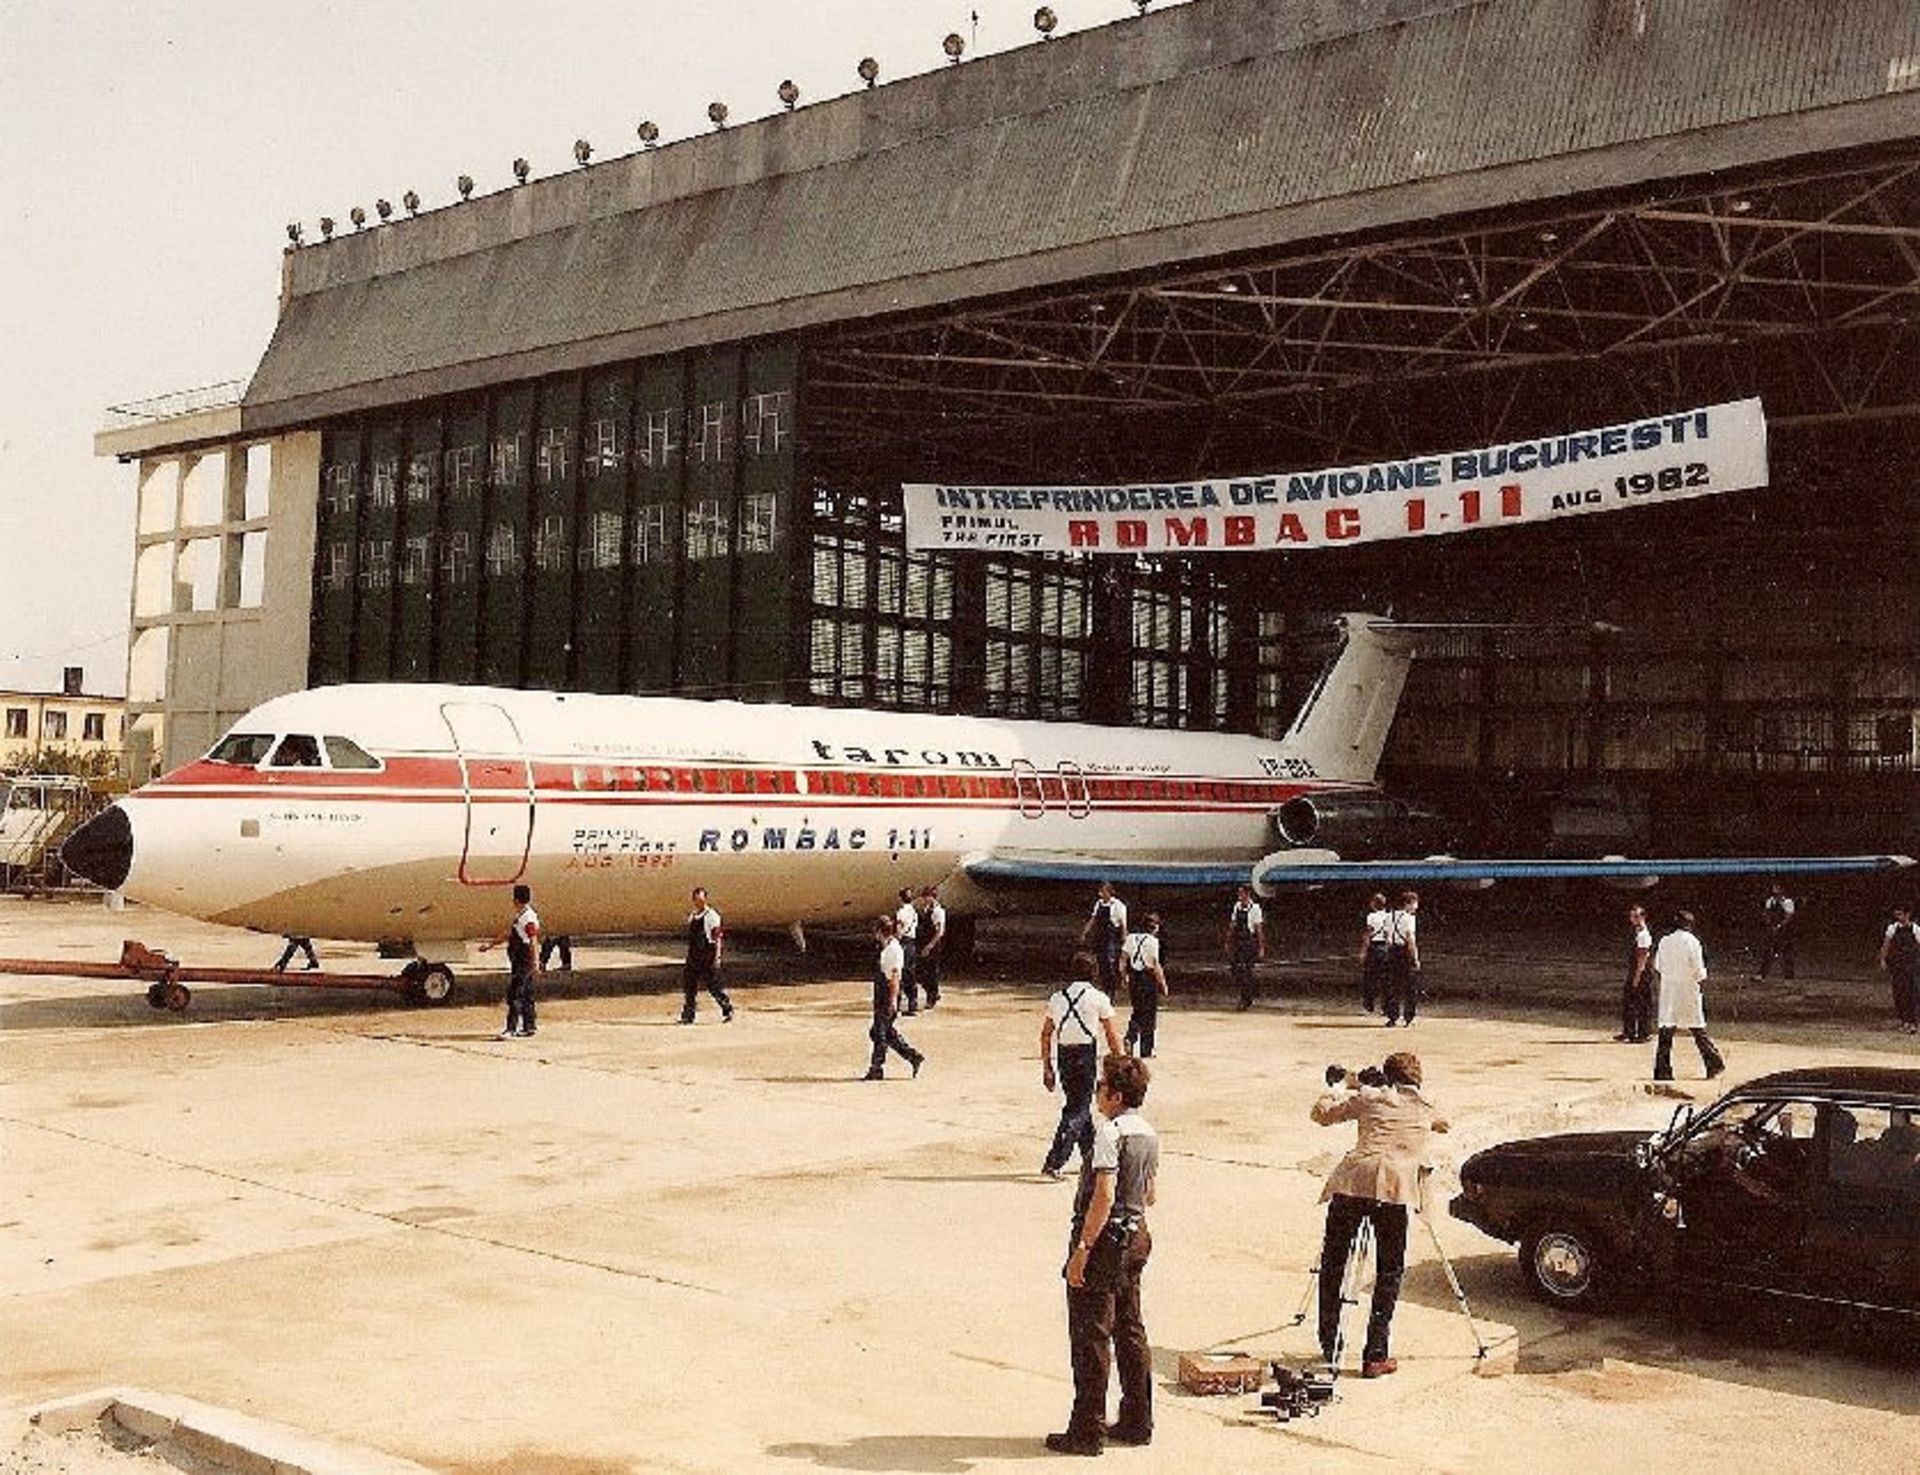 "Super one-eleven" presidential plane, for the official flights of President Nicolae Ceausescu, 1986 - Image 13 of 13